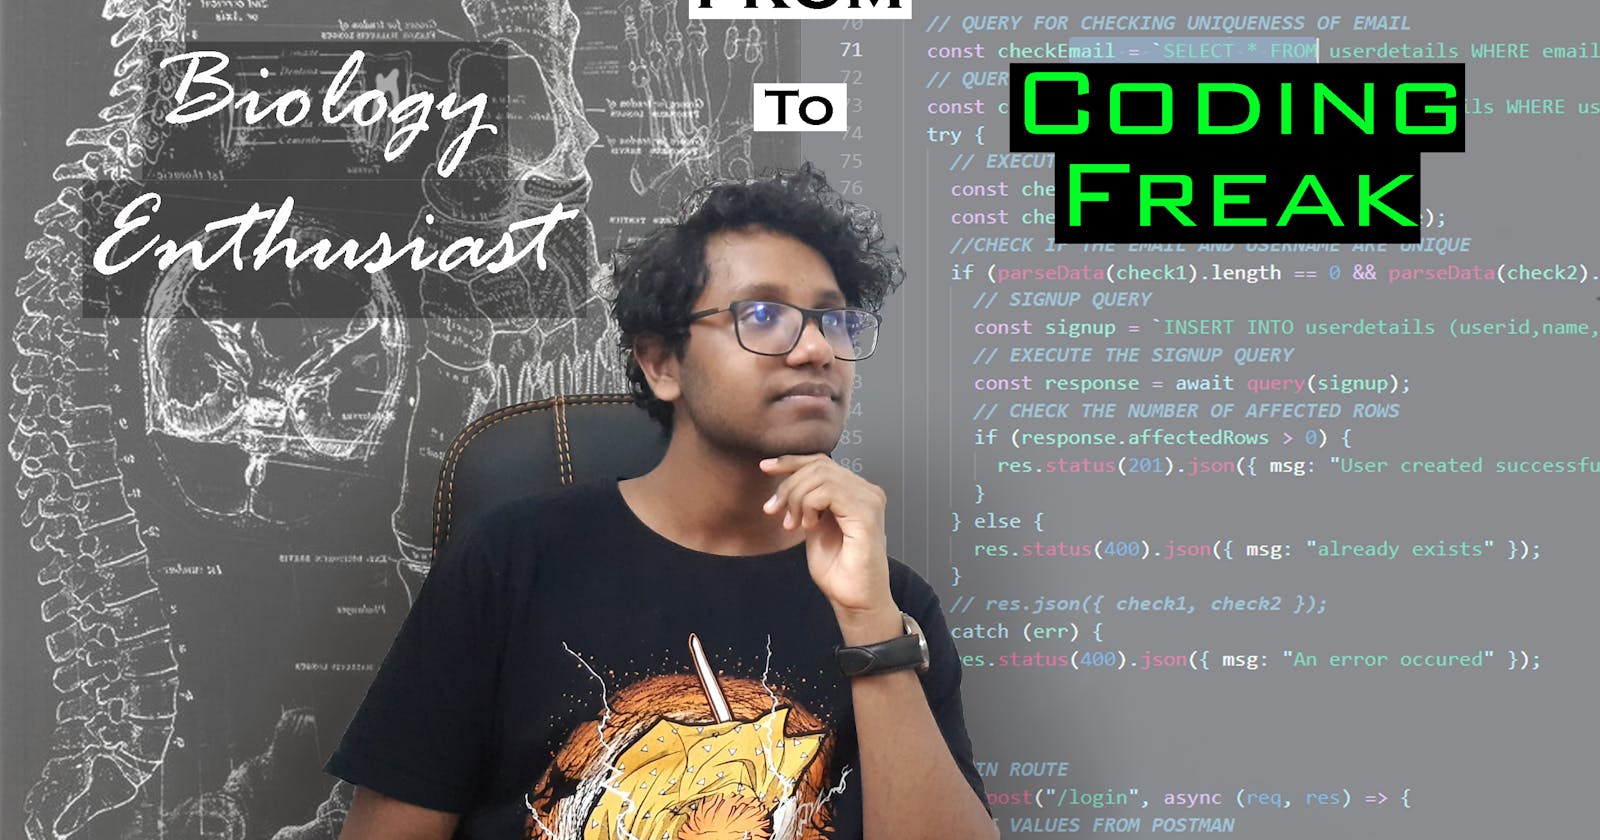 From a Biology Enthusiast to a Coding Freak. My Journey So Far. [ August 2021 Perspective]